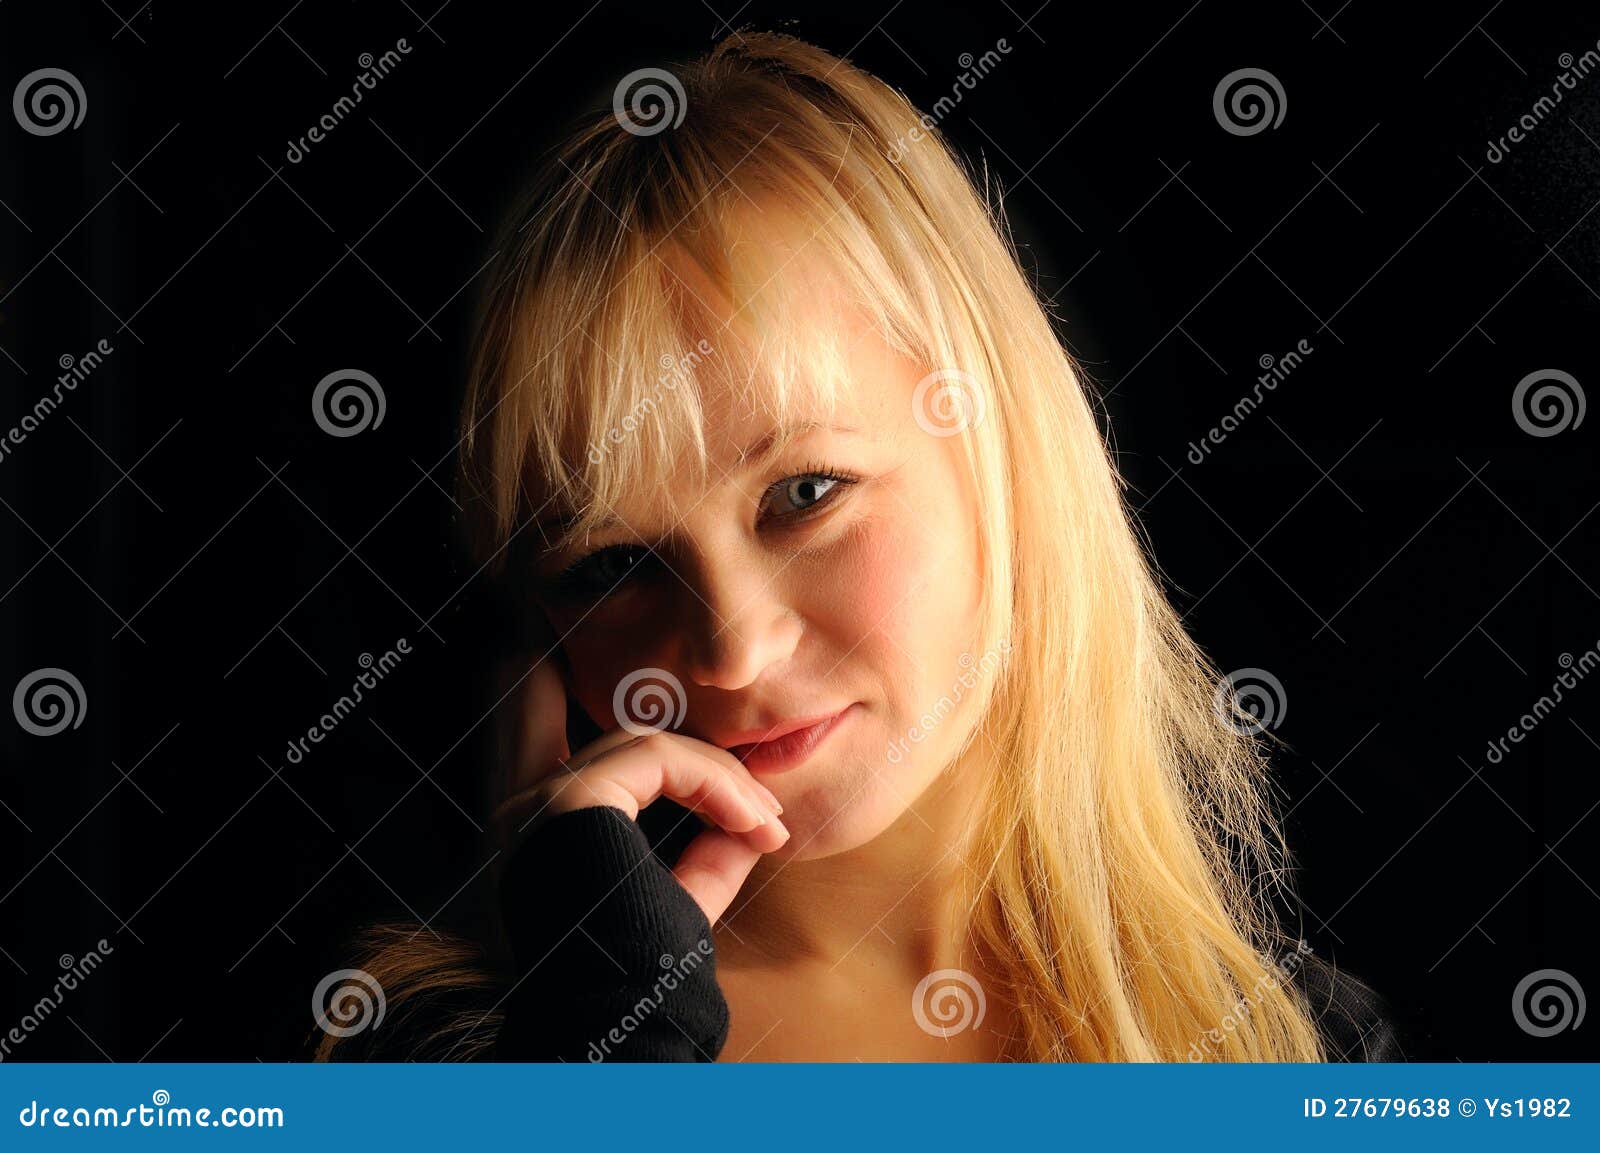 Young Blond Hair Woman Portrait on Dark Background Stock Photo - Image ...